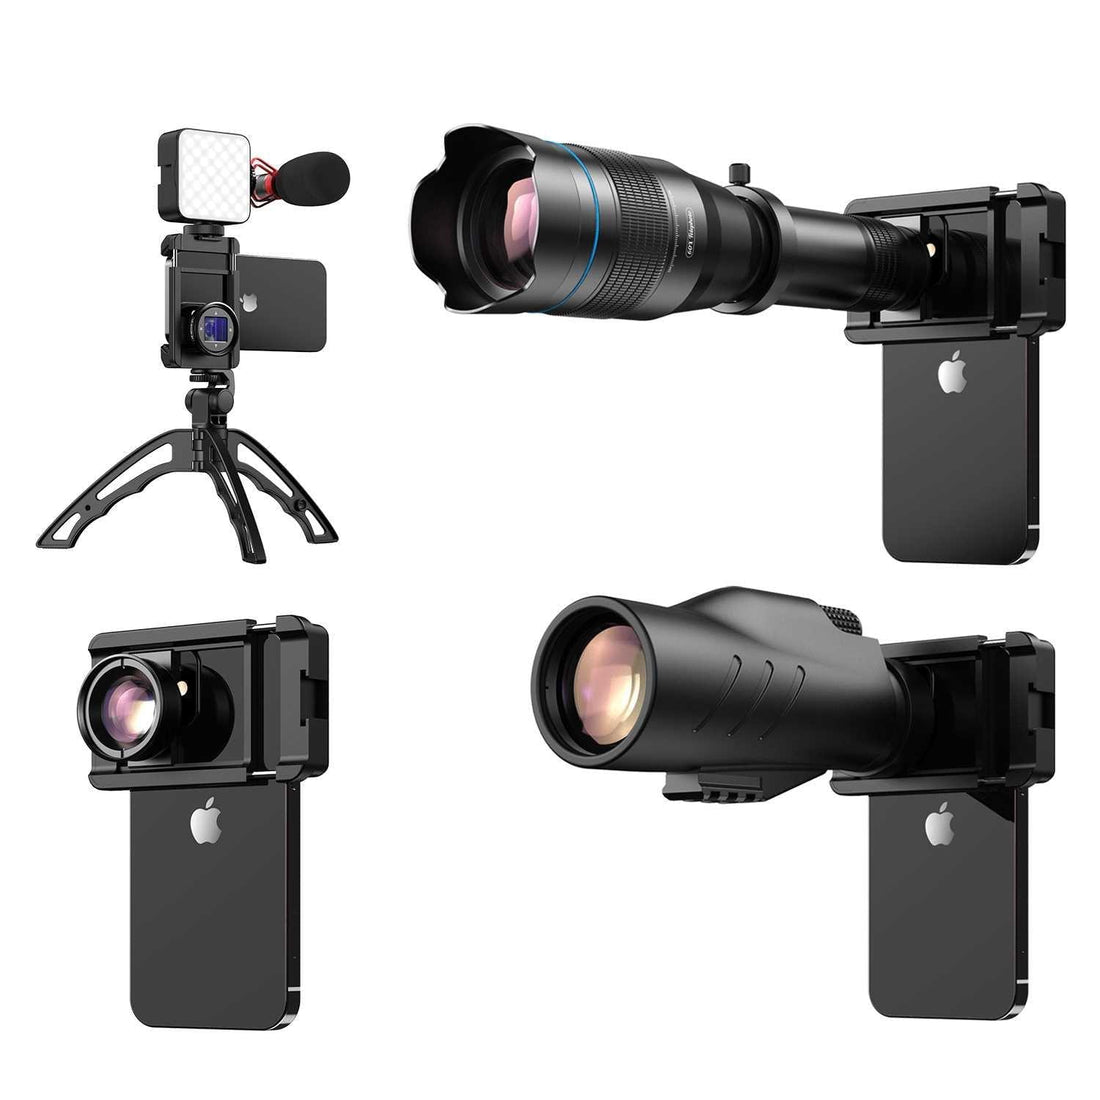 [New] Apexel Adjustable 17mm Mobile Phone Lens Holder Others - APEXEL INDIA - Mobile Lens - Mobile Camera Lens - Cellphone Accessories - Phone Lens - Smartphone Lens